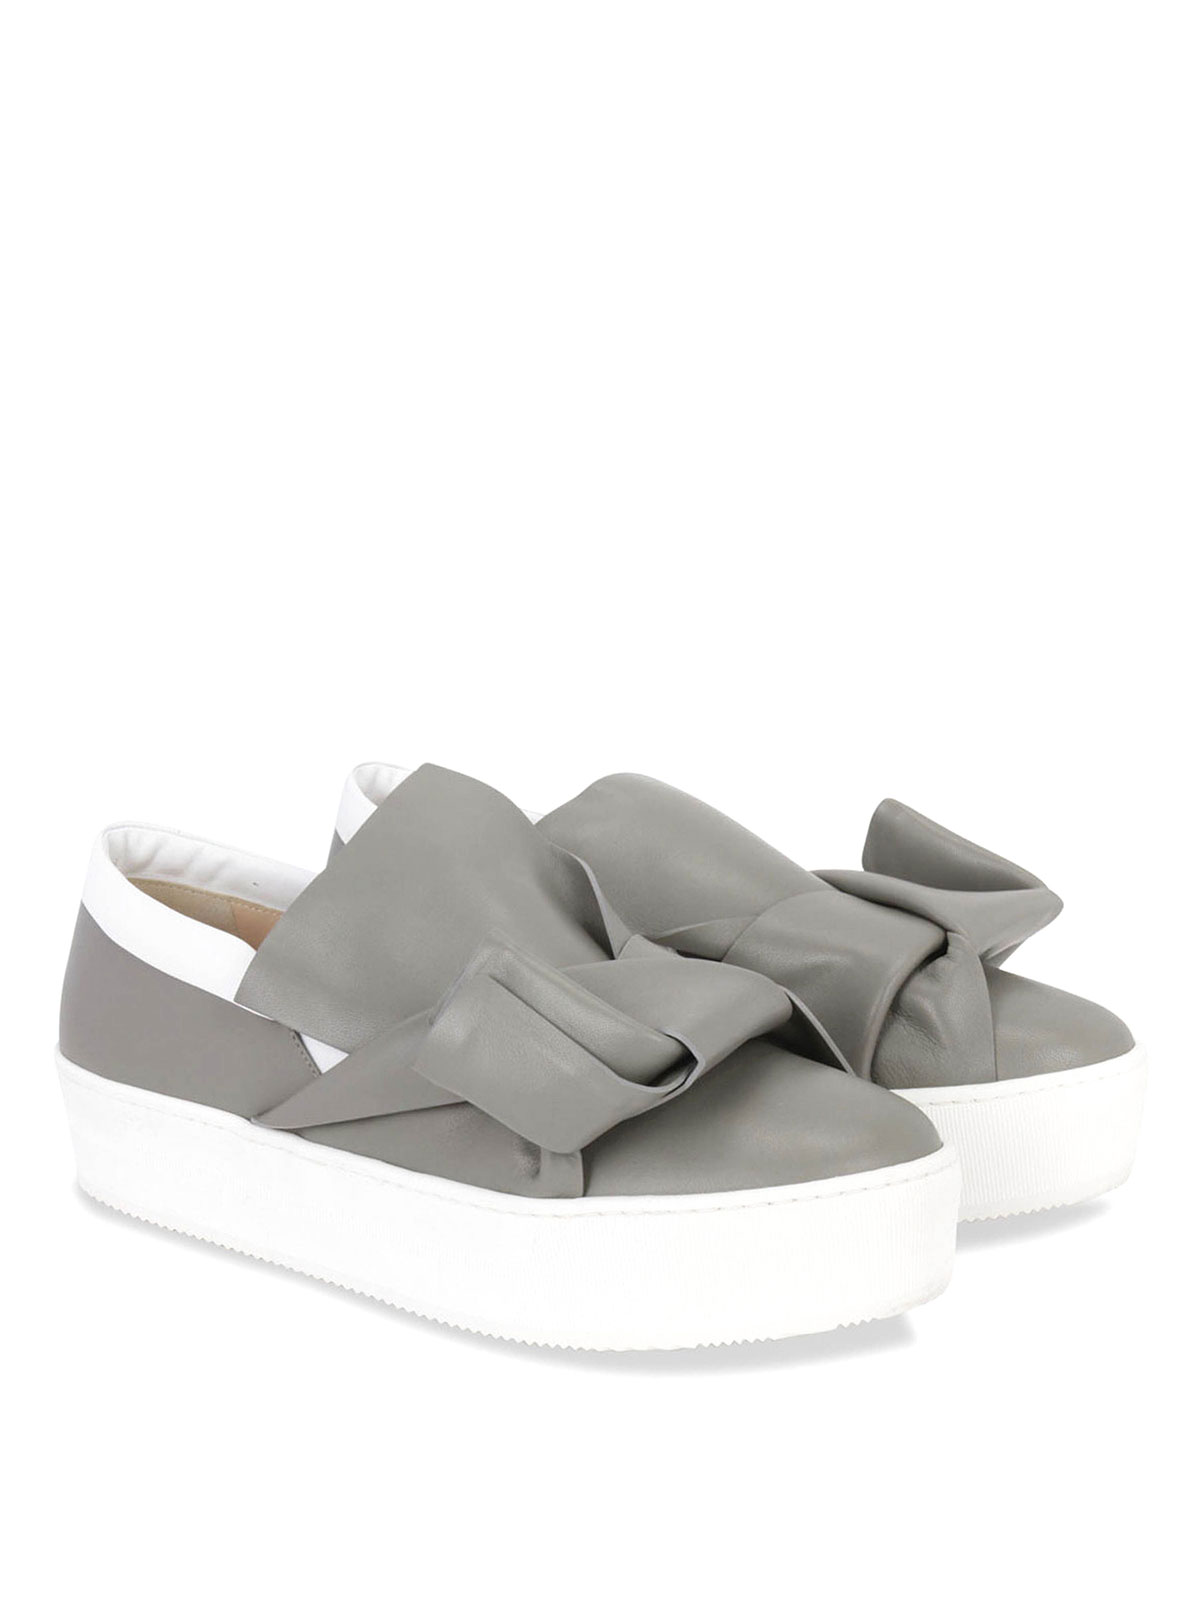 N°21 - KNOT LEATHER SLIP ON SNEAKERS 